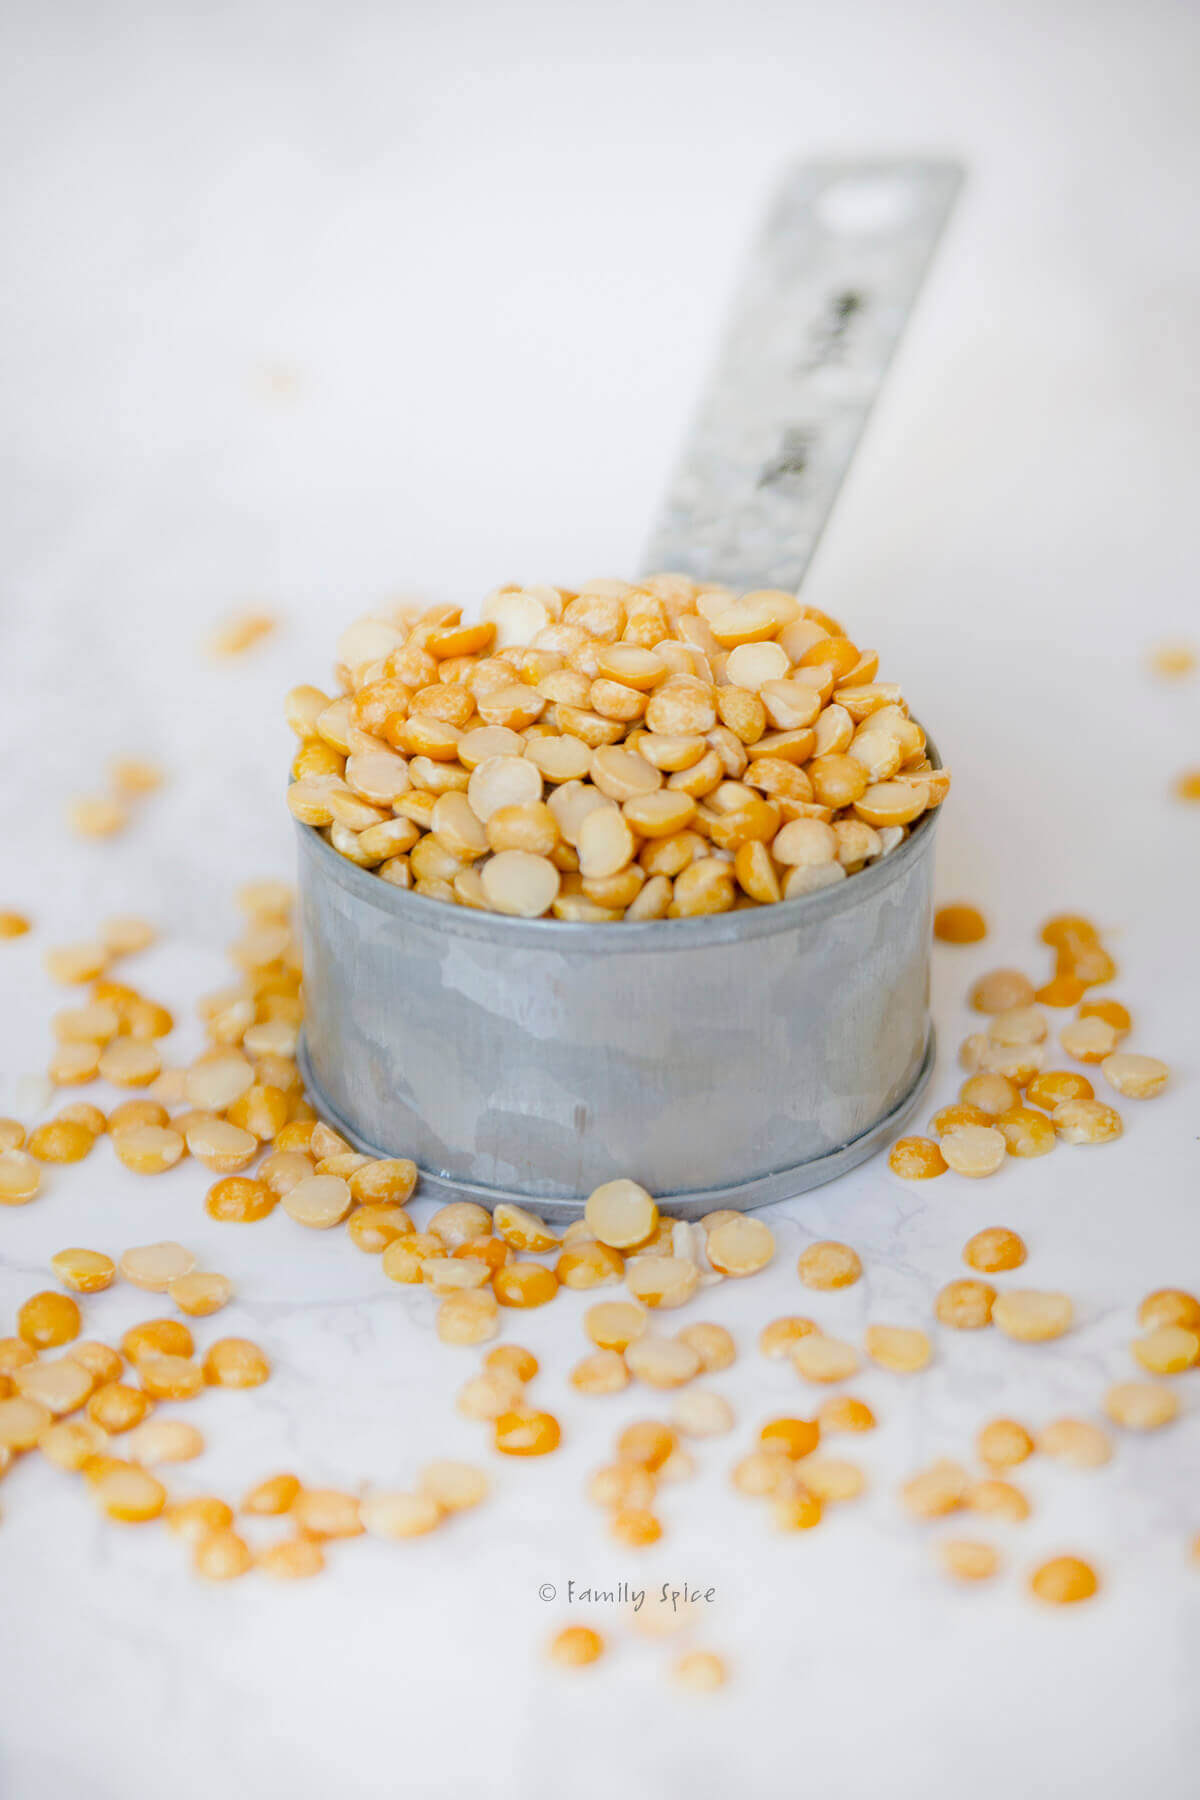 A metal measuring cup with yellow split peas in it